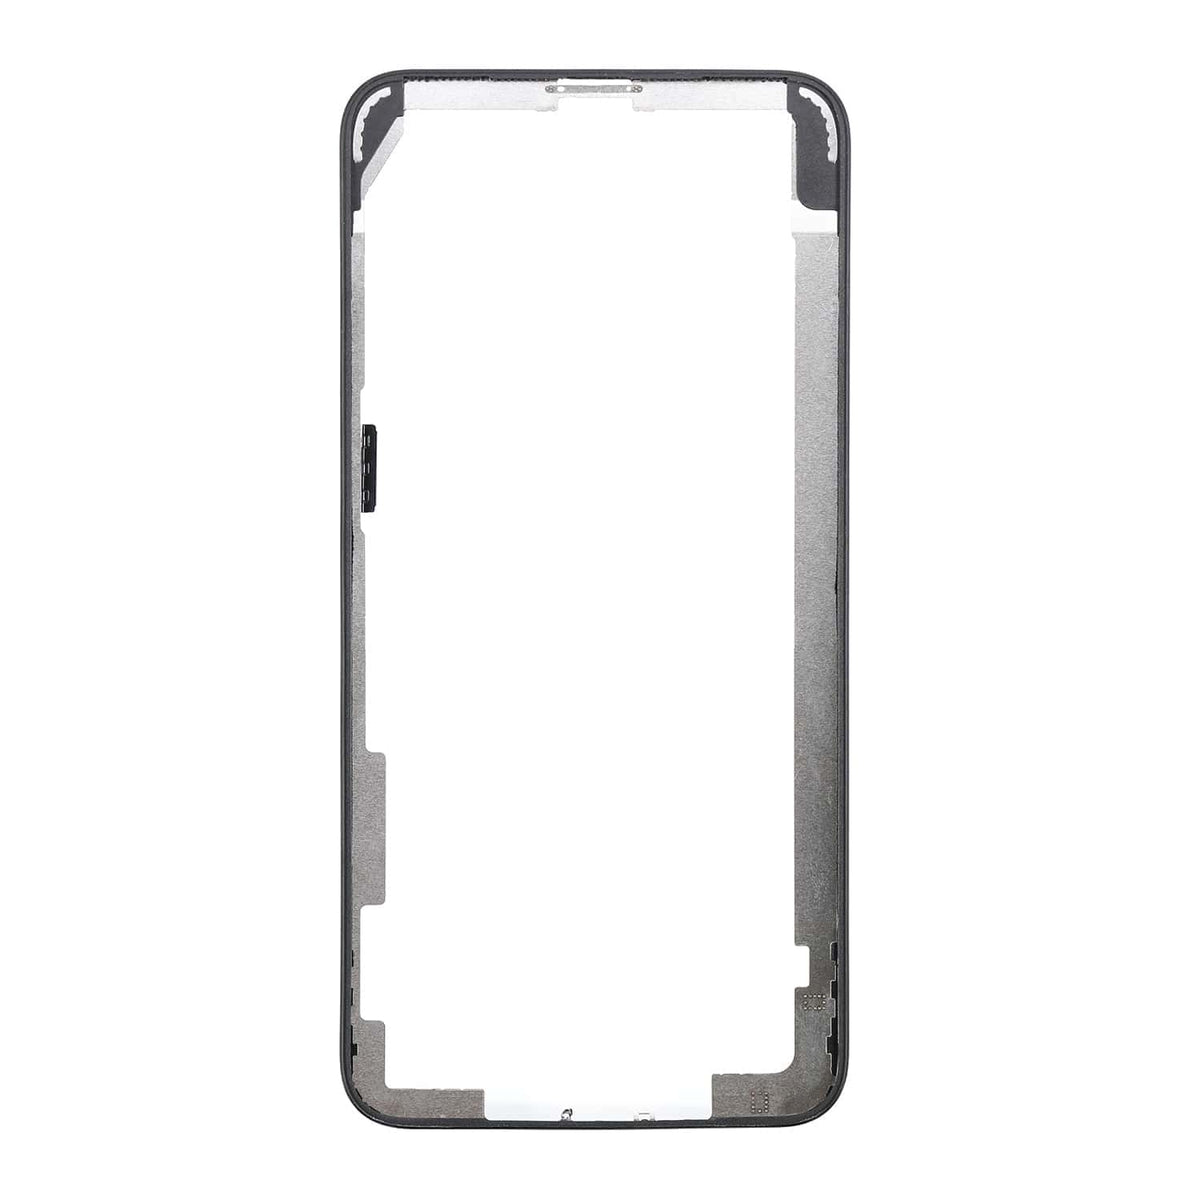 FRONT SUPPORTING DIGITIZER FRAME FOR IPHONE 11 PRO